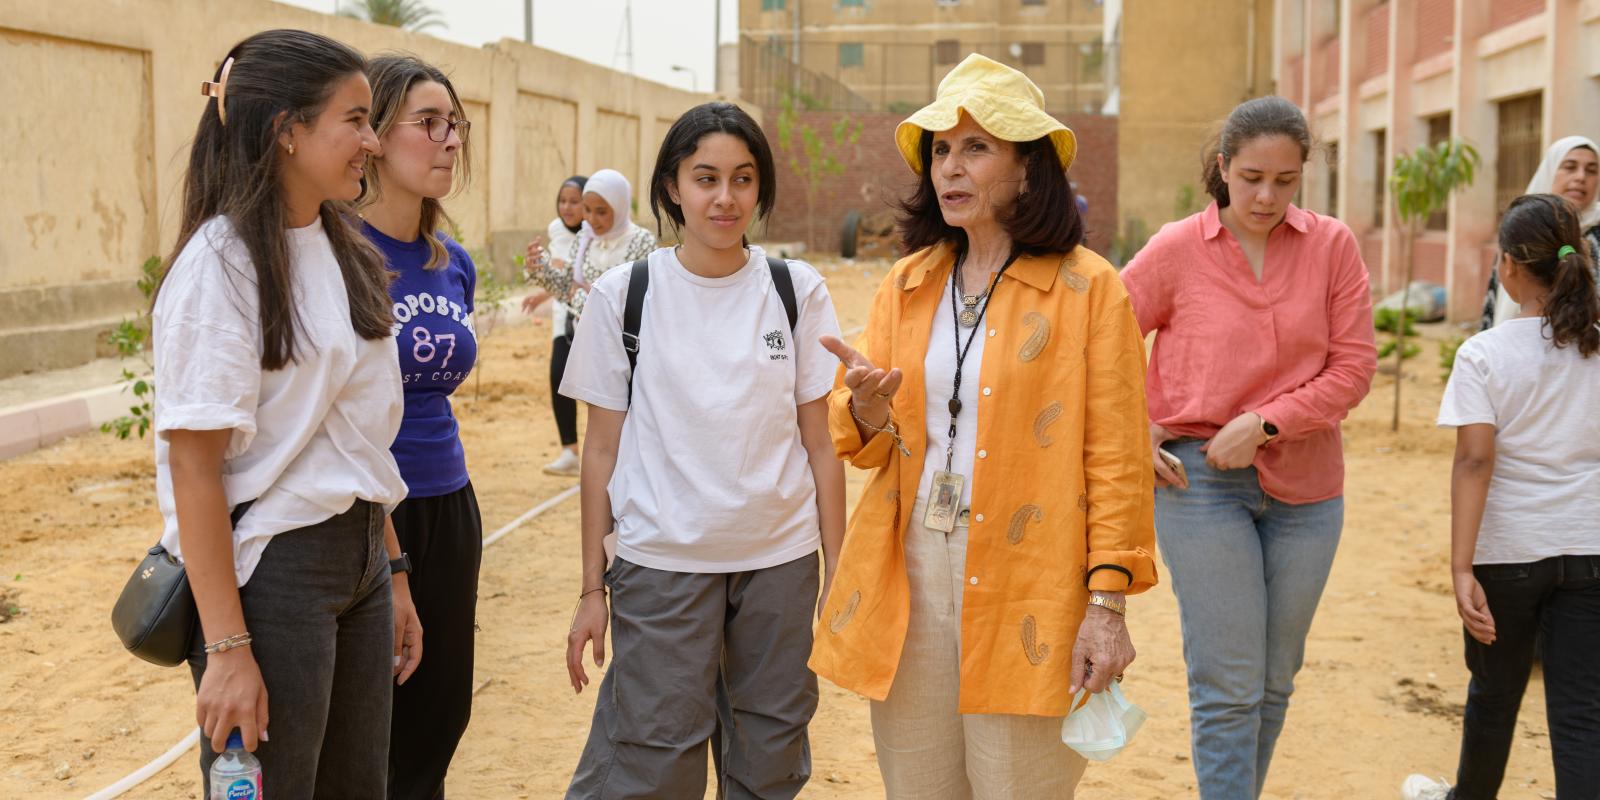 a woman in an orange shirt speaks with students in the yard of a school